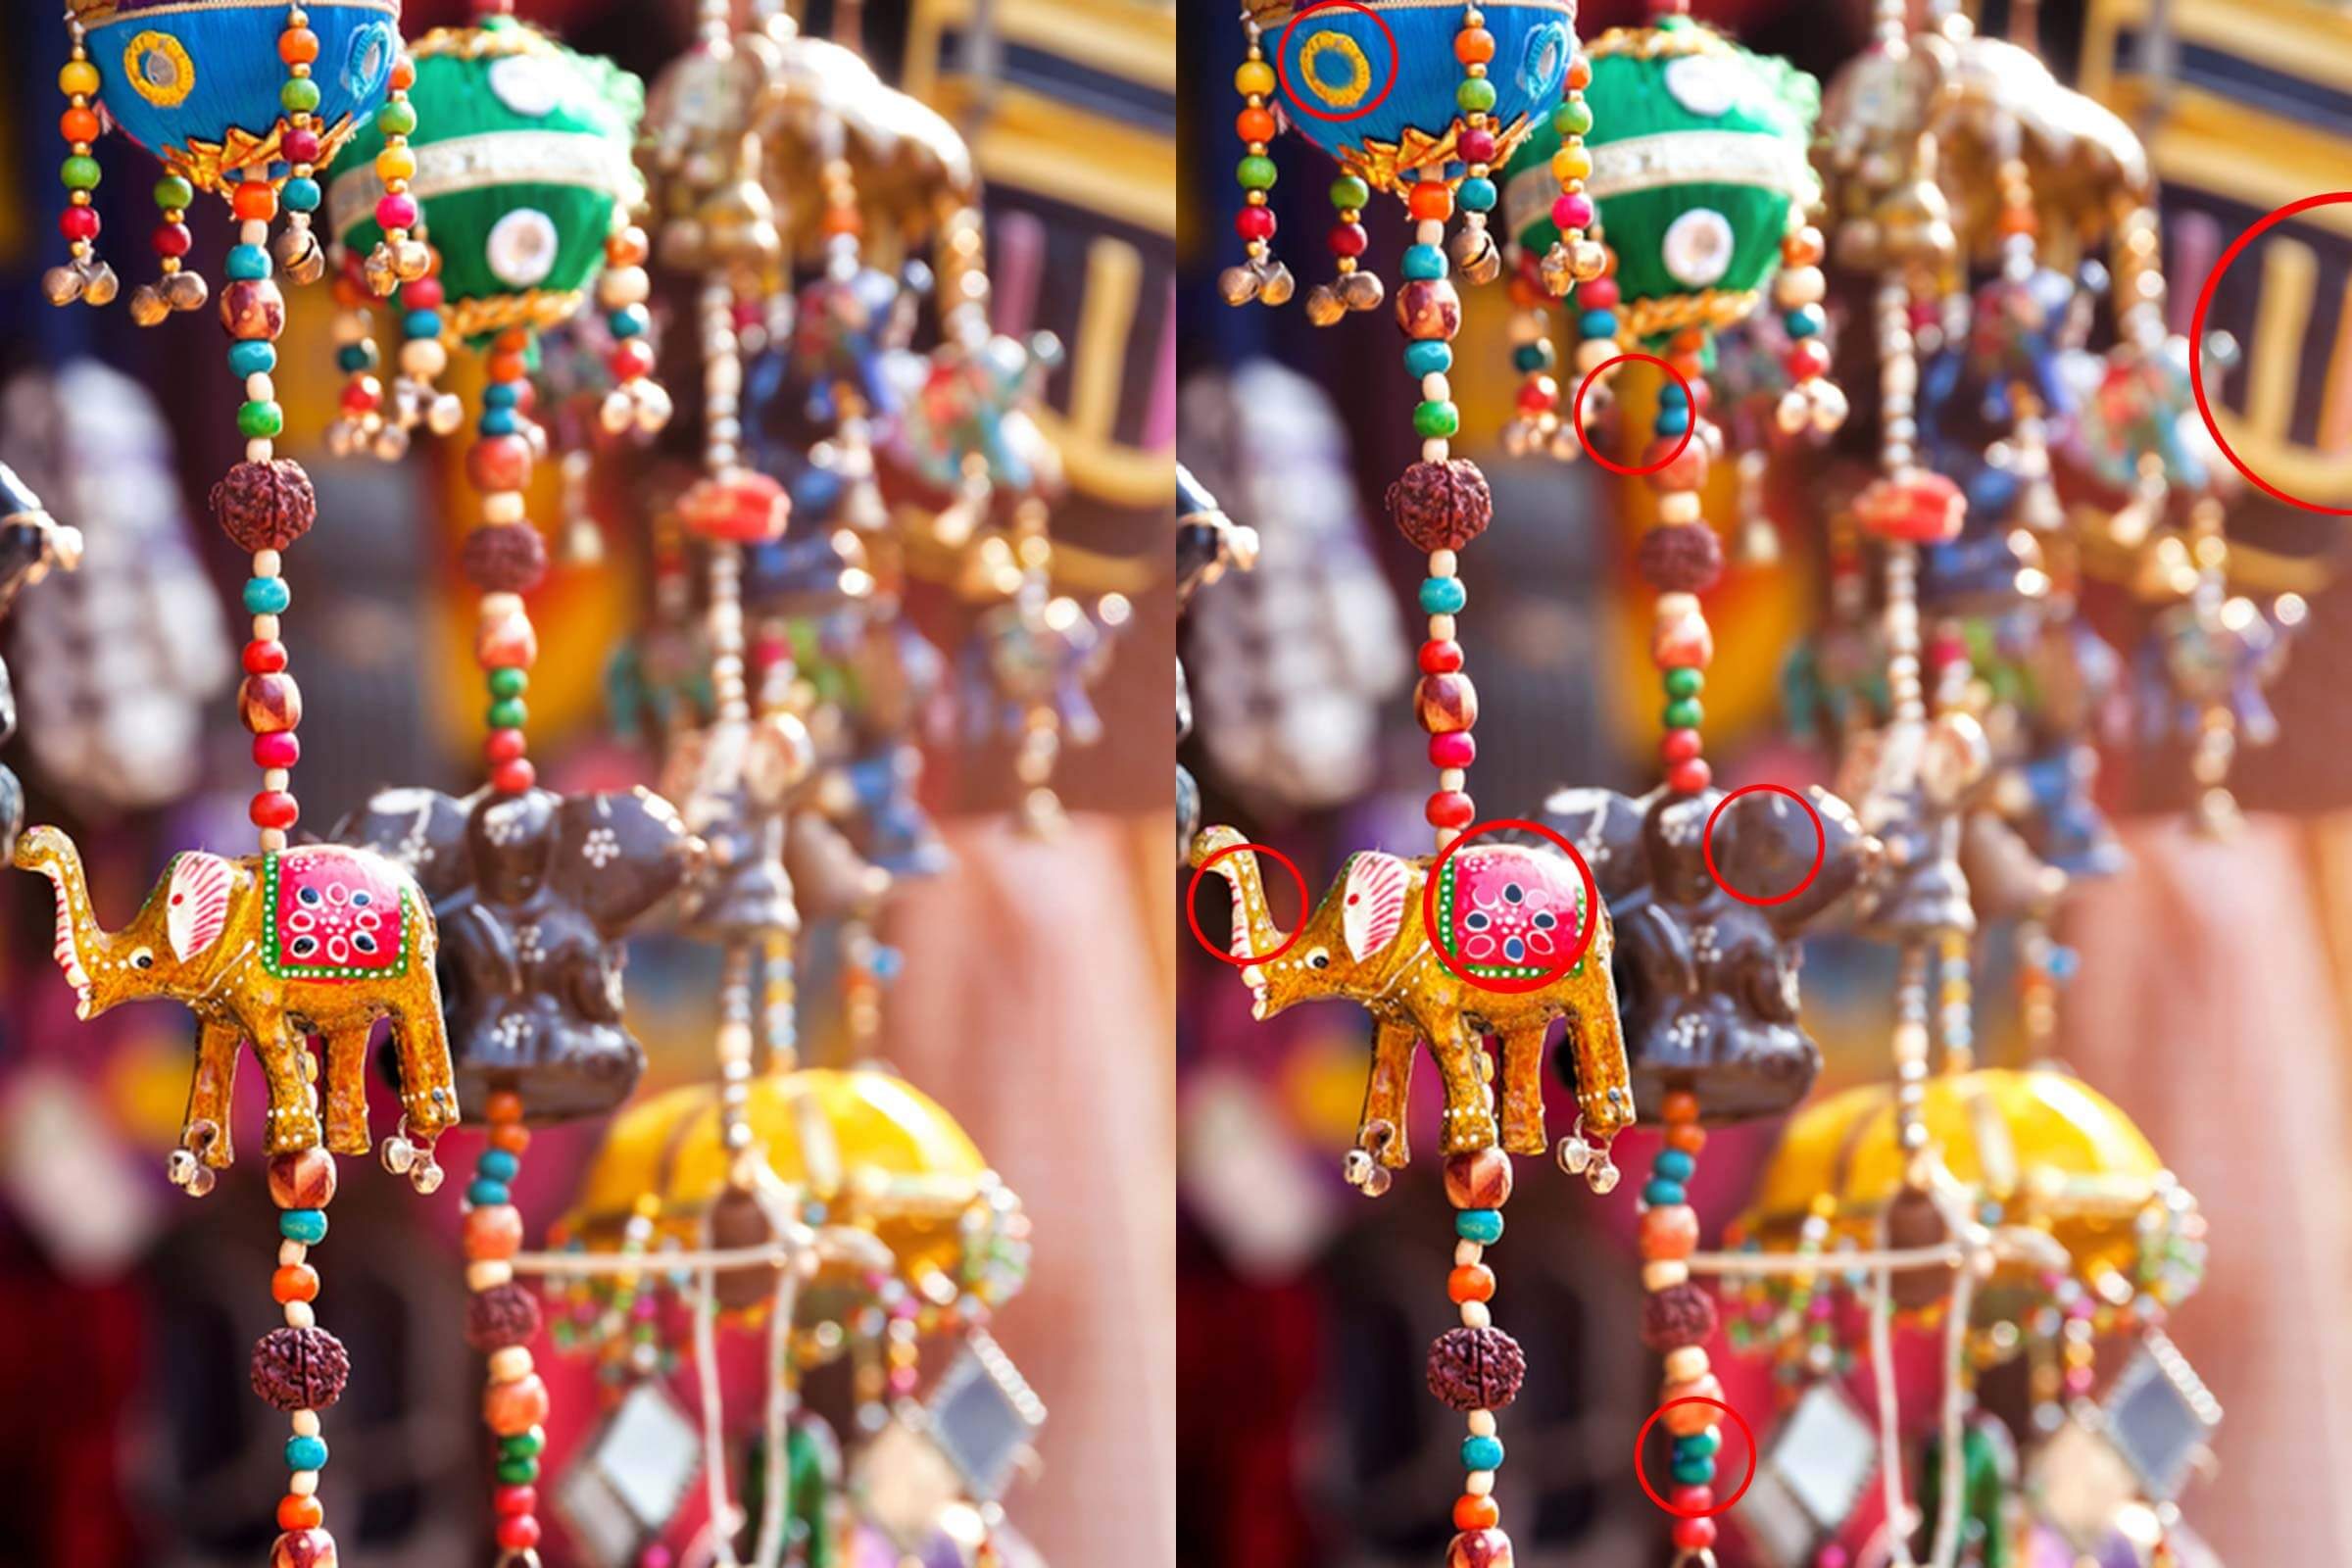 Spot The Difference: Can you spot 5 differences between the two pictures in  12 seconds?